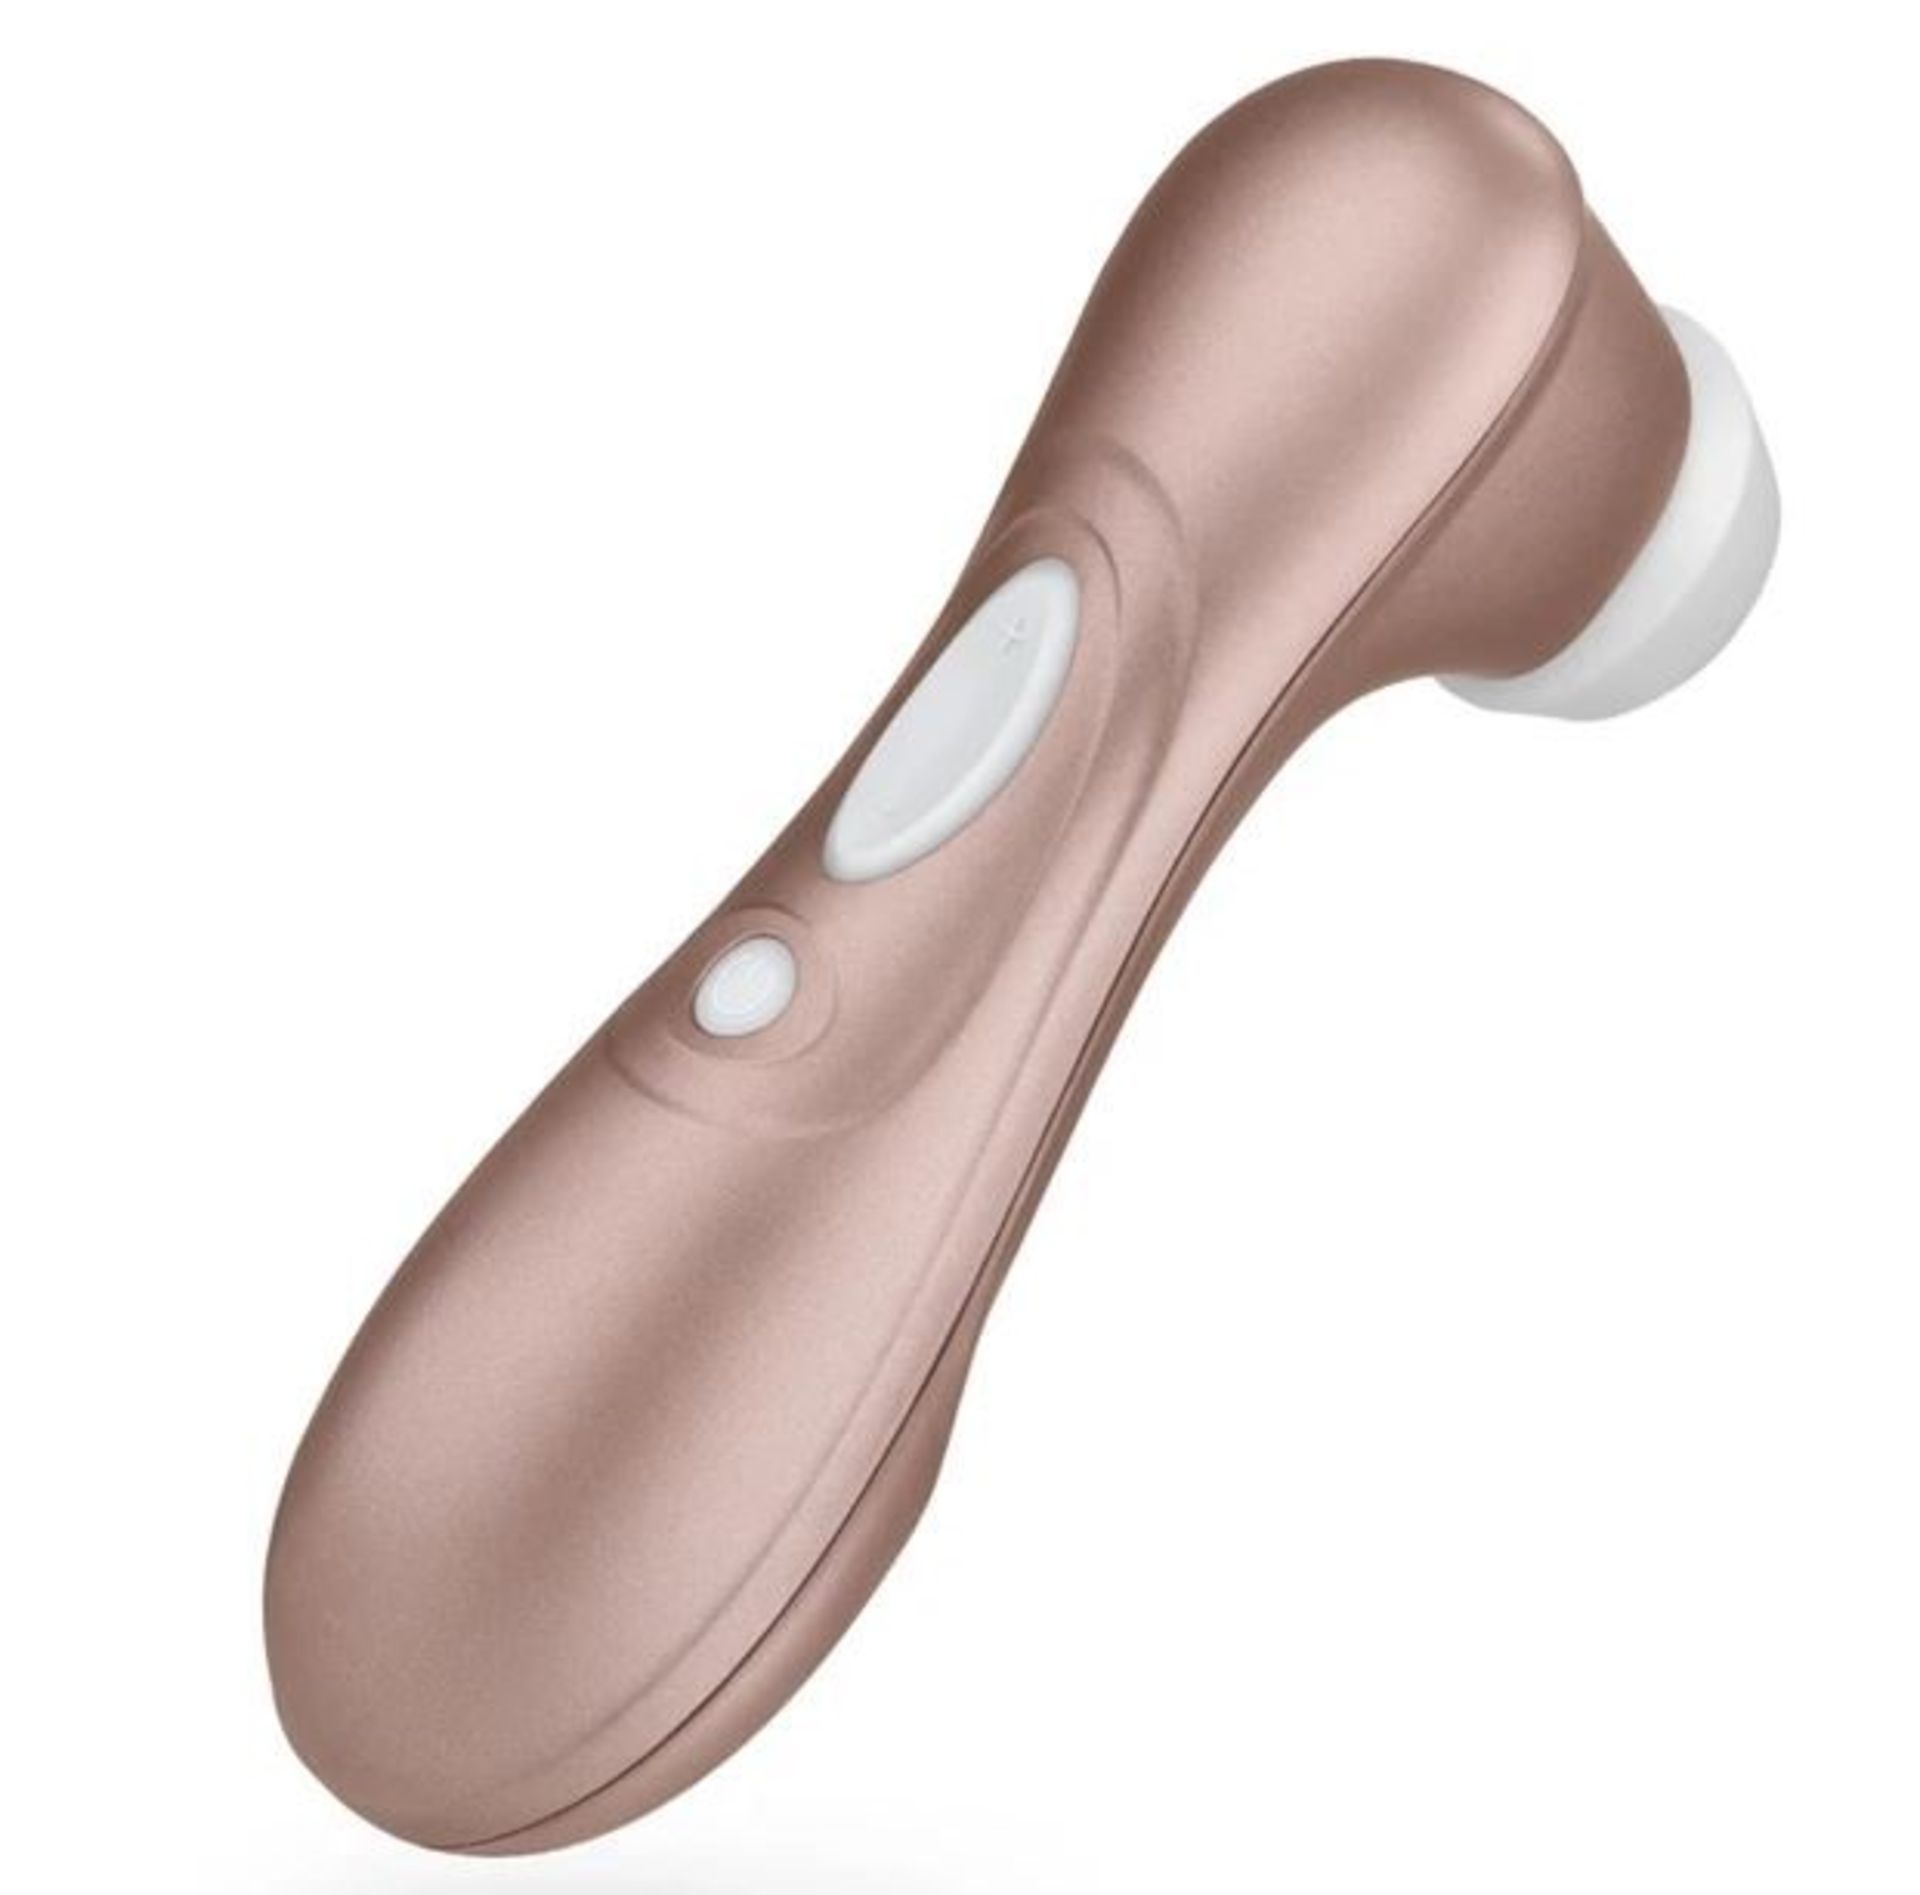 1 X SATISFYER PRO 2 CLITORAL STIMULATOR IN GOLDEN PINK / RRP £80.00 / AS NEW UNOPENED